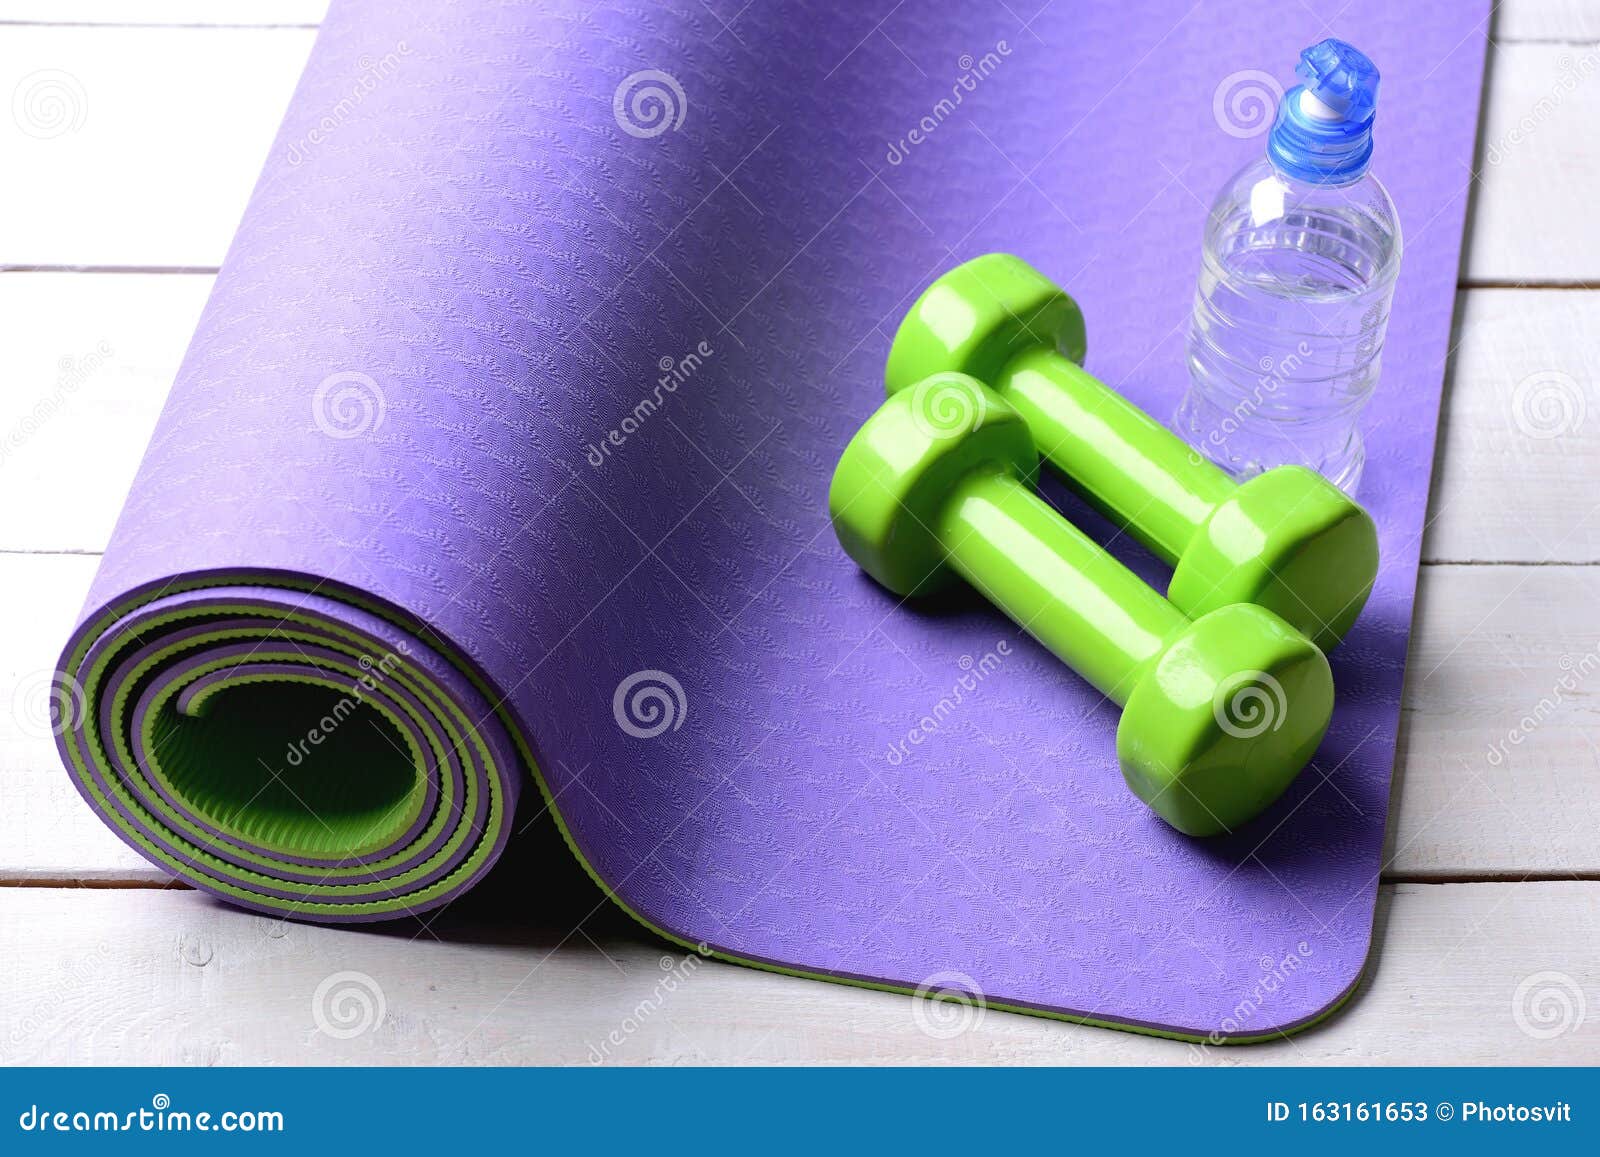 Shaping And Fitness Equipment. Dumbbells Made Of Green Plastic Stock ...